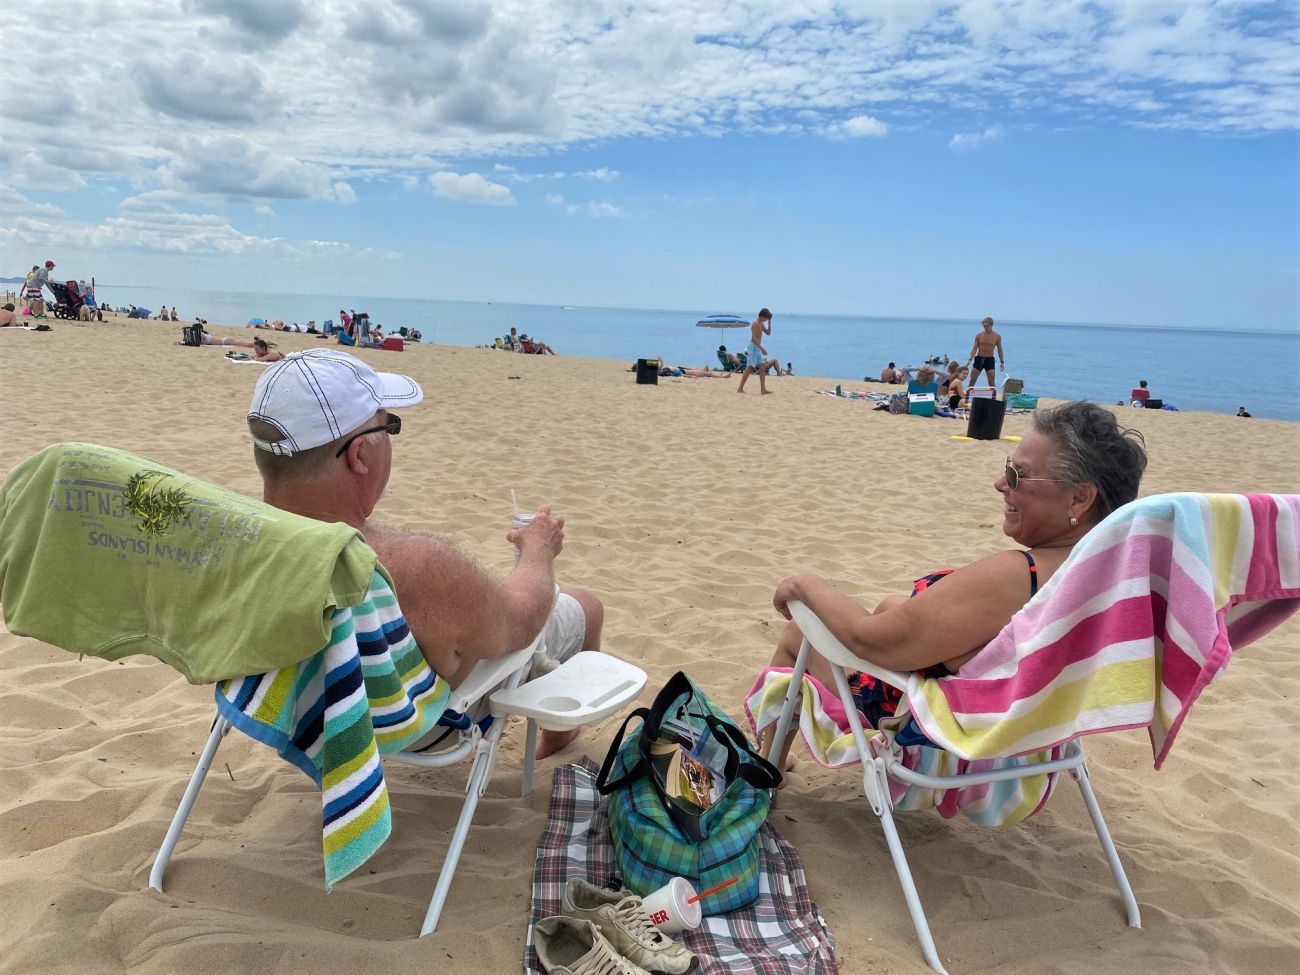 Cary and Lori Gray, seated facing away from the camera, on the beach looking toward the lake